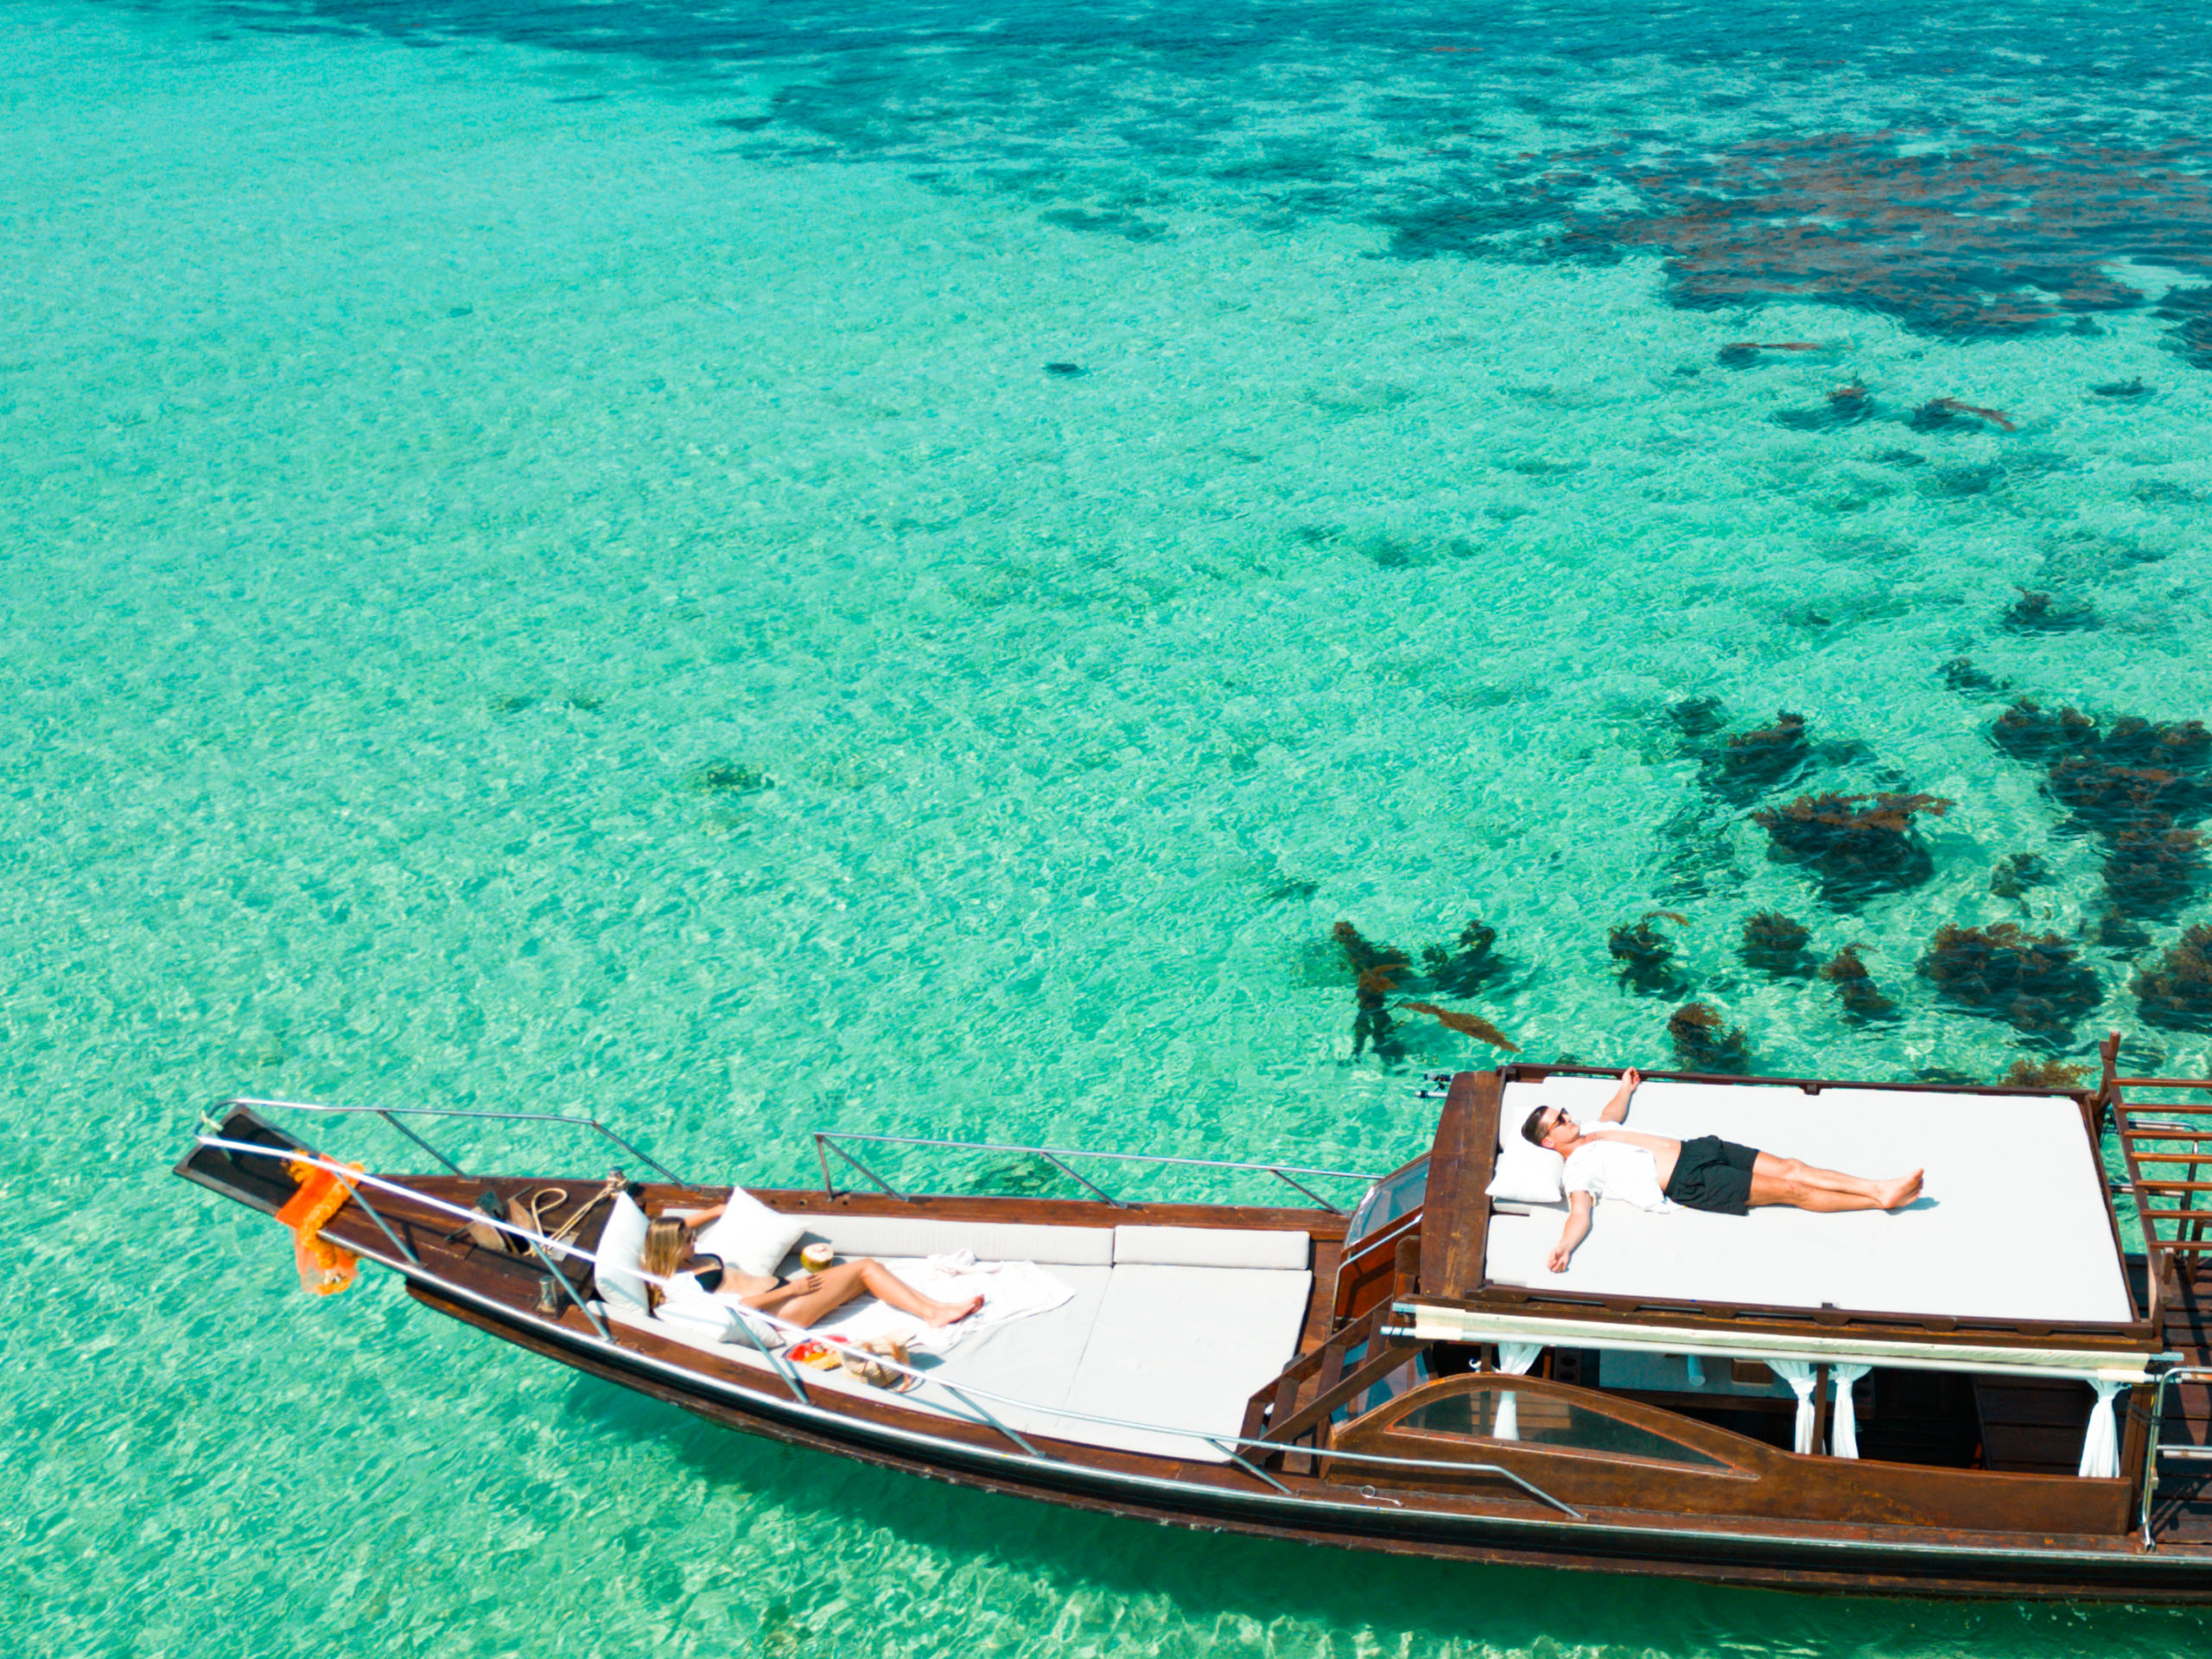 A person relaxing on the bow of a wooden boat over clear turquoise waters.